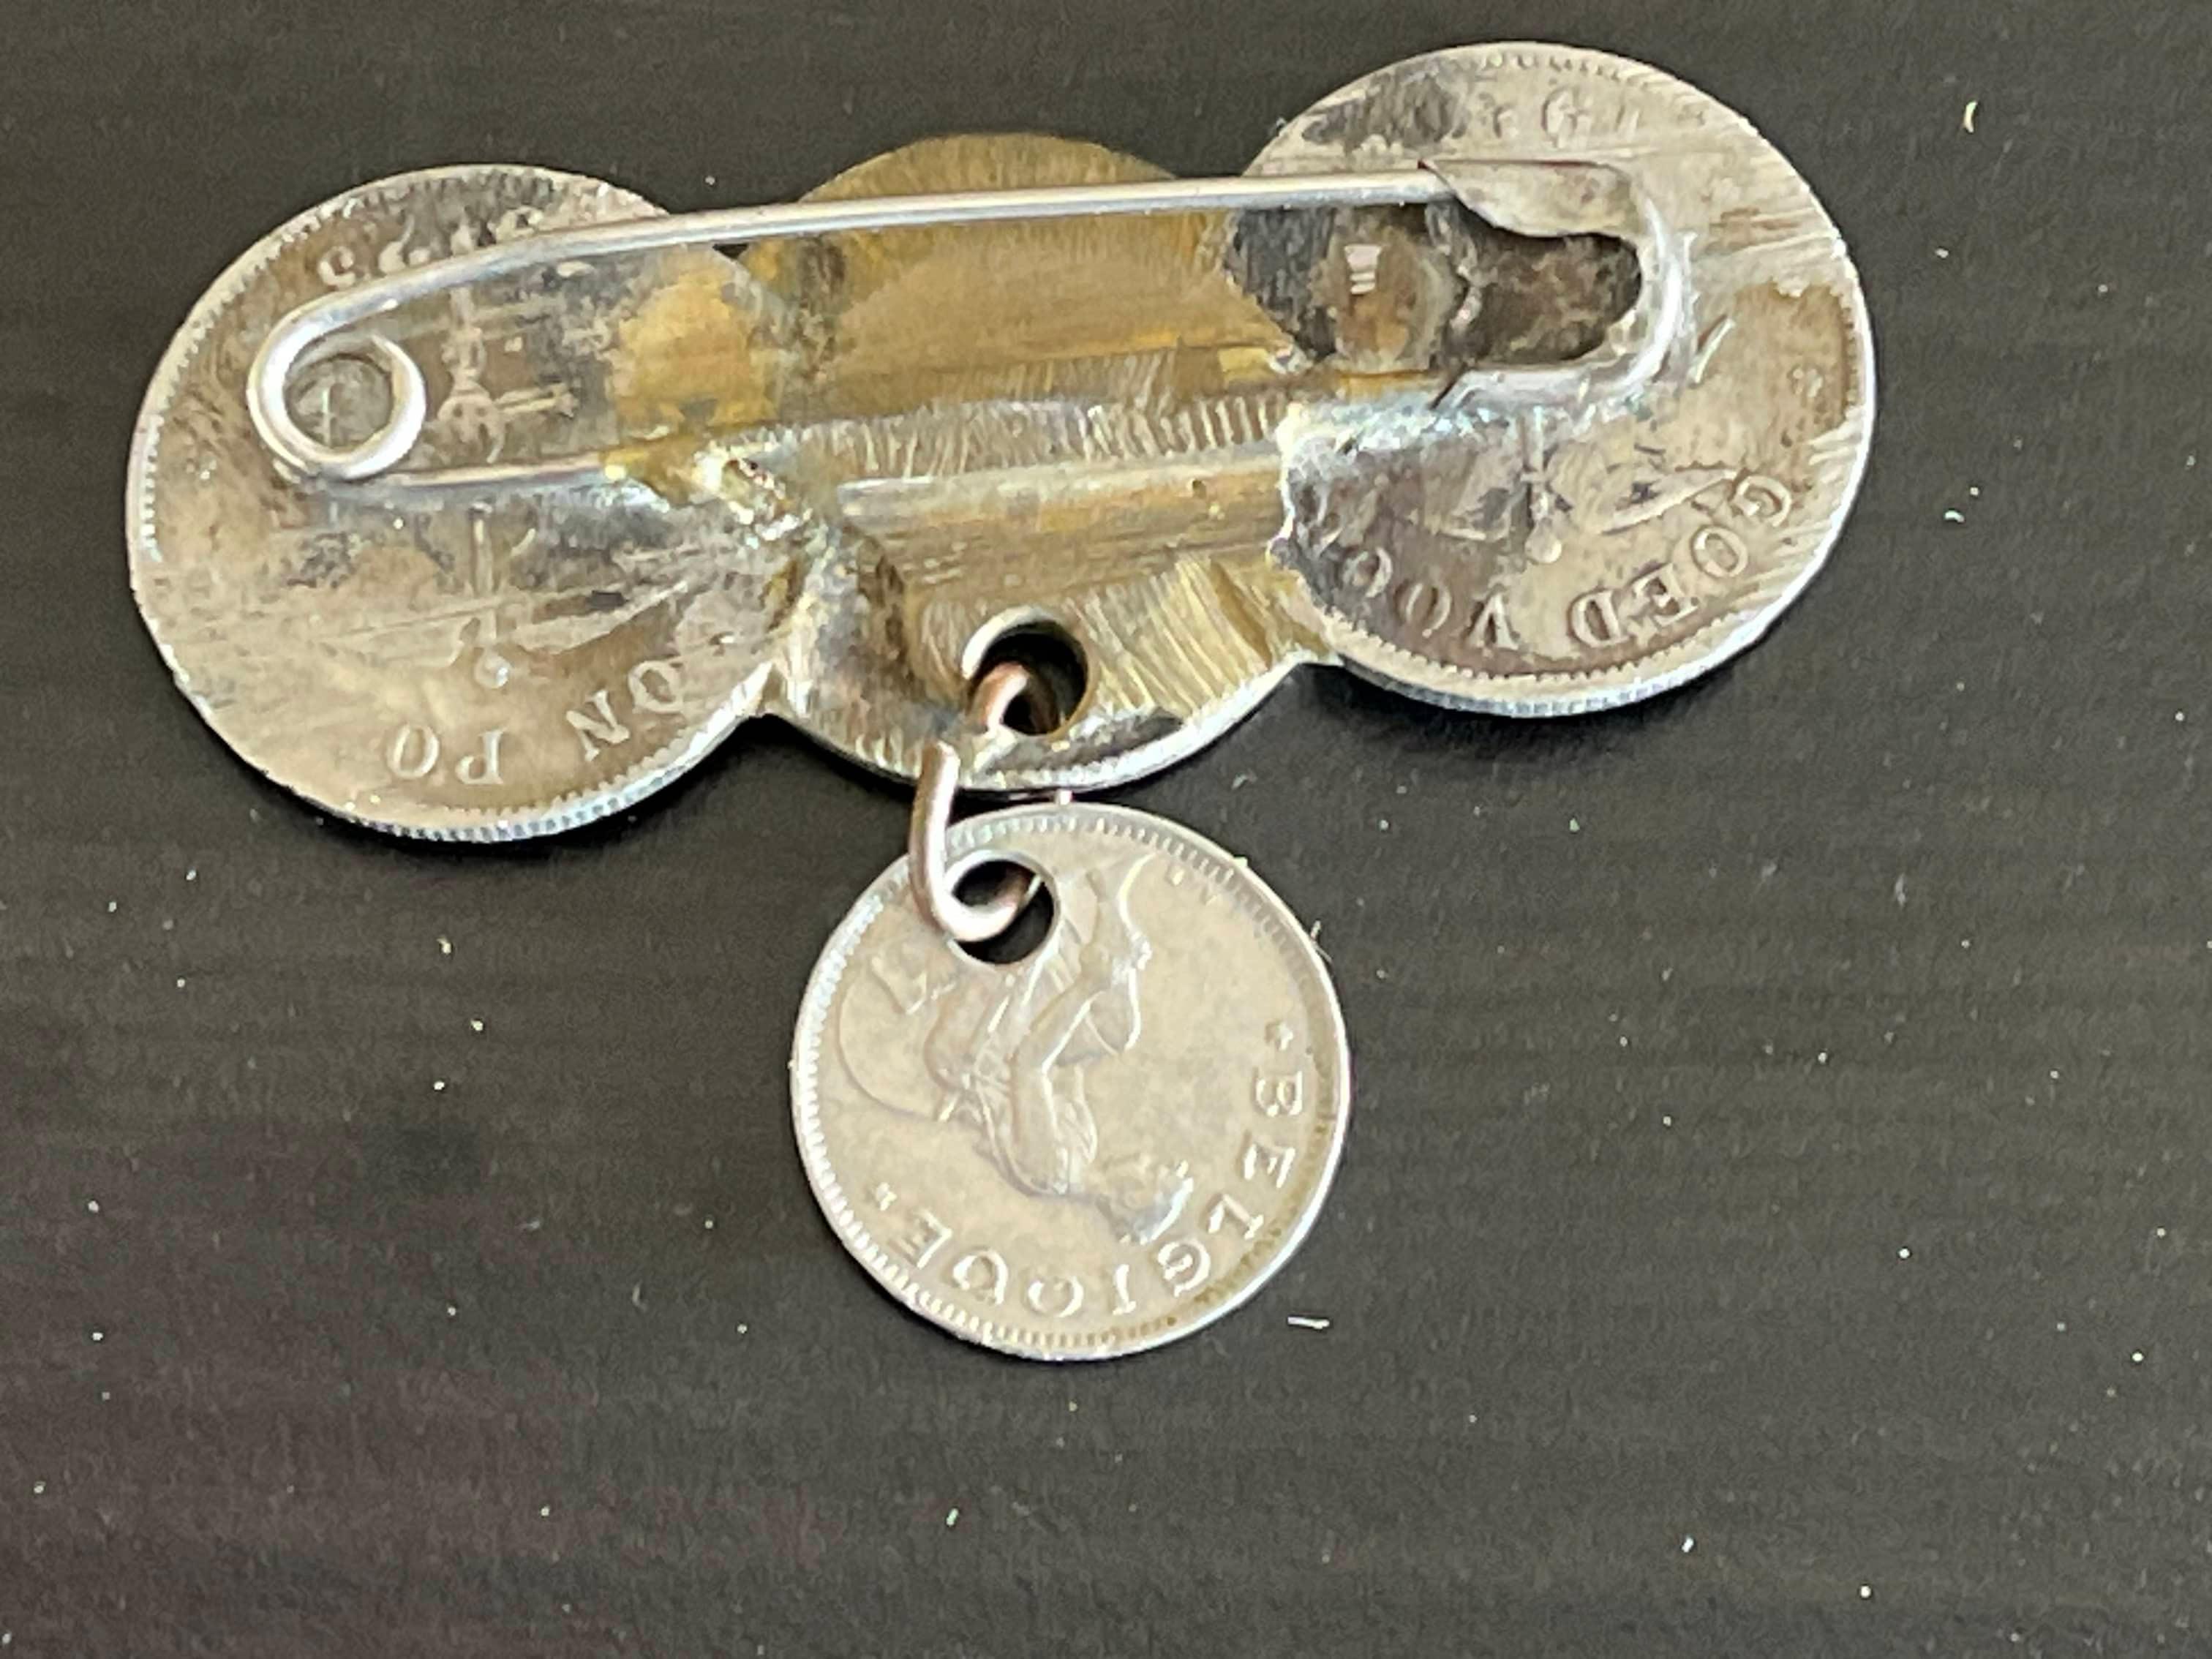 1920's Belgian Coins Brooch - WWI Wounded